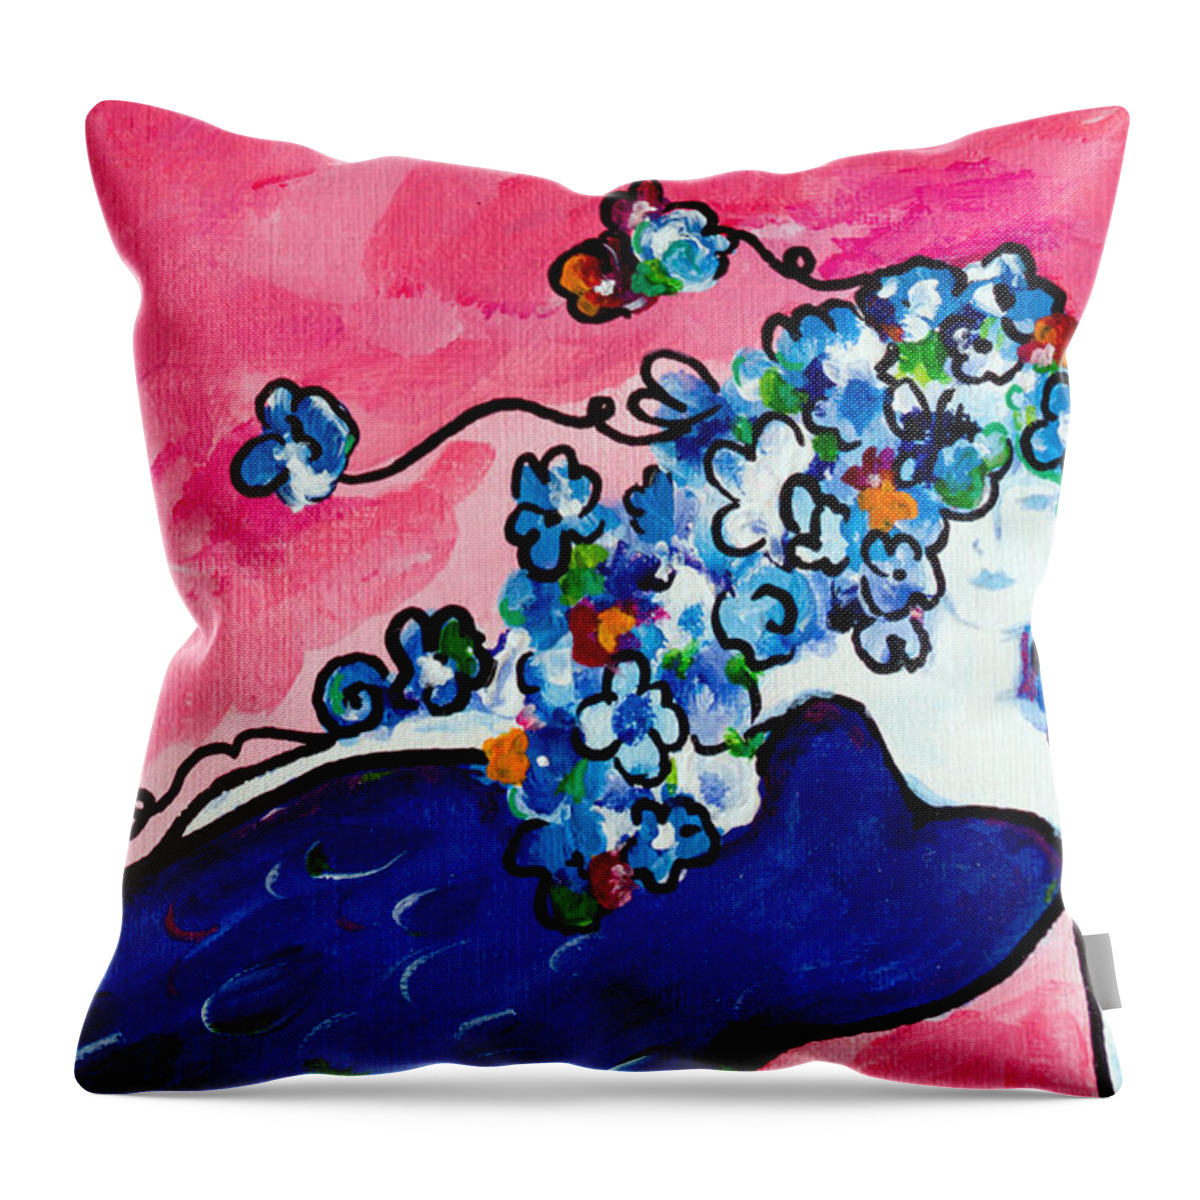 Pink Throw Pillow featuring the painting Mermaid by Beth Ann Scott